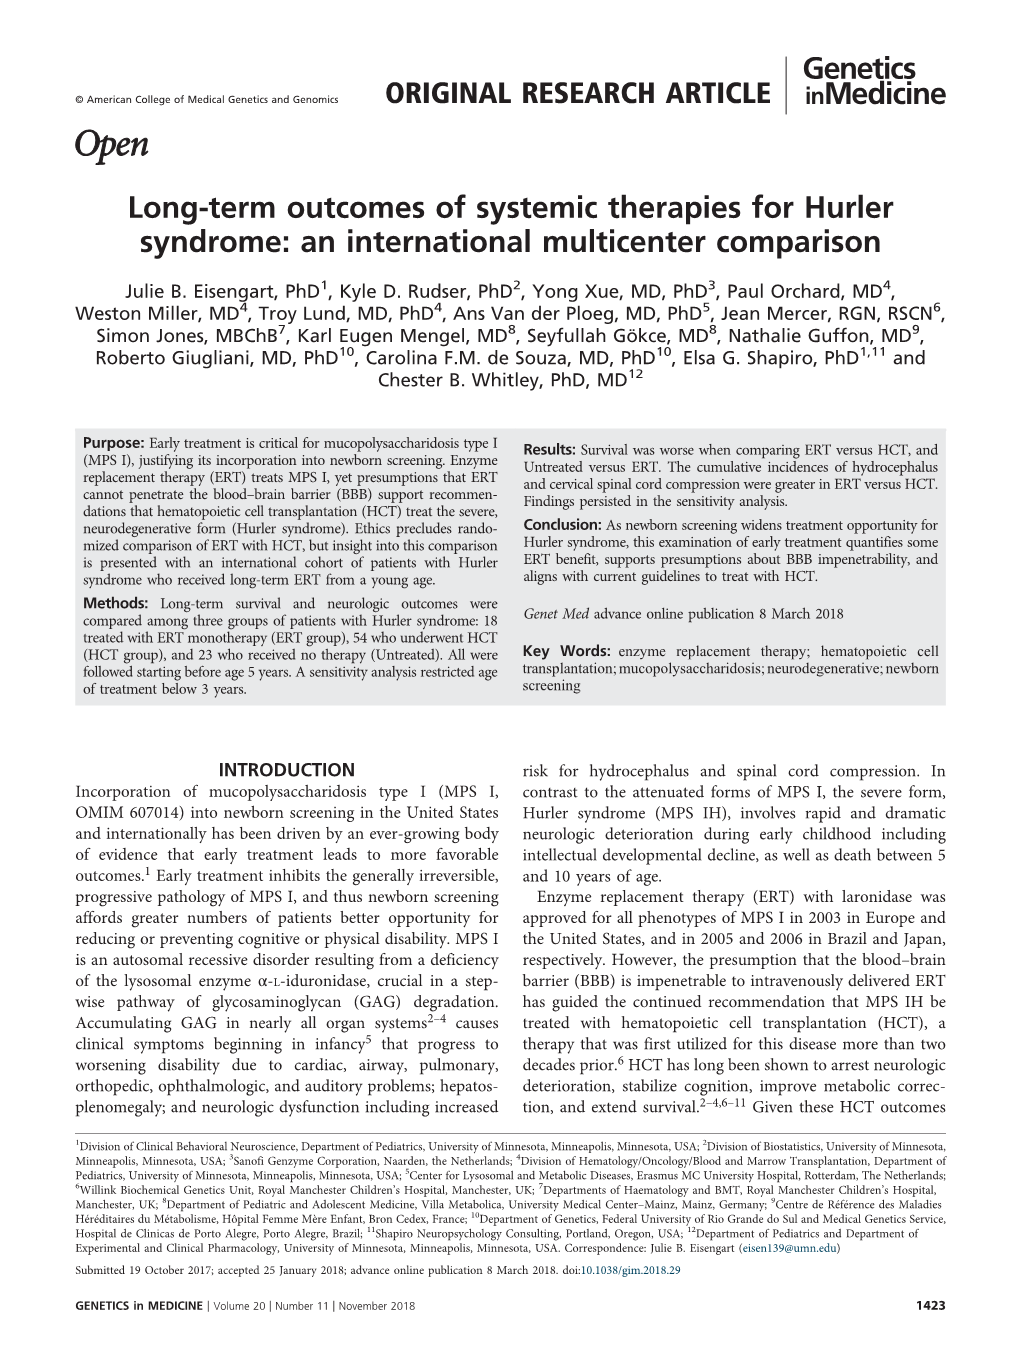 Long-Term Outcomes of Systemic Therapies for Hurler Syndrome: an International Multicenter Comparison